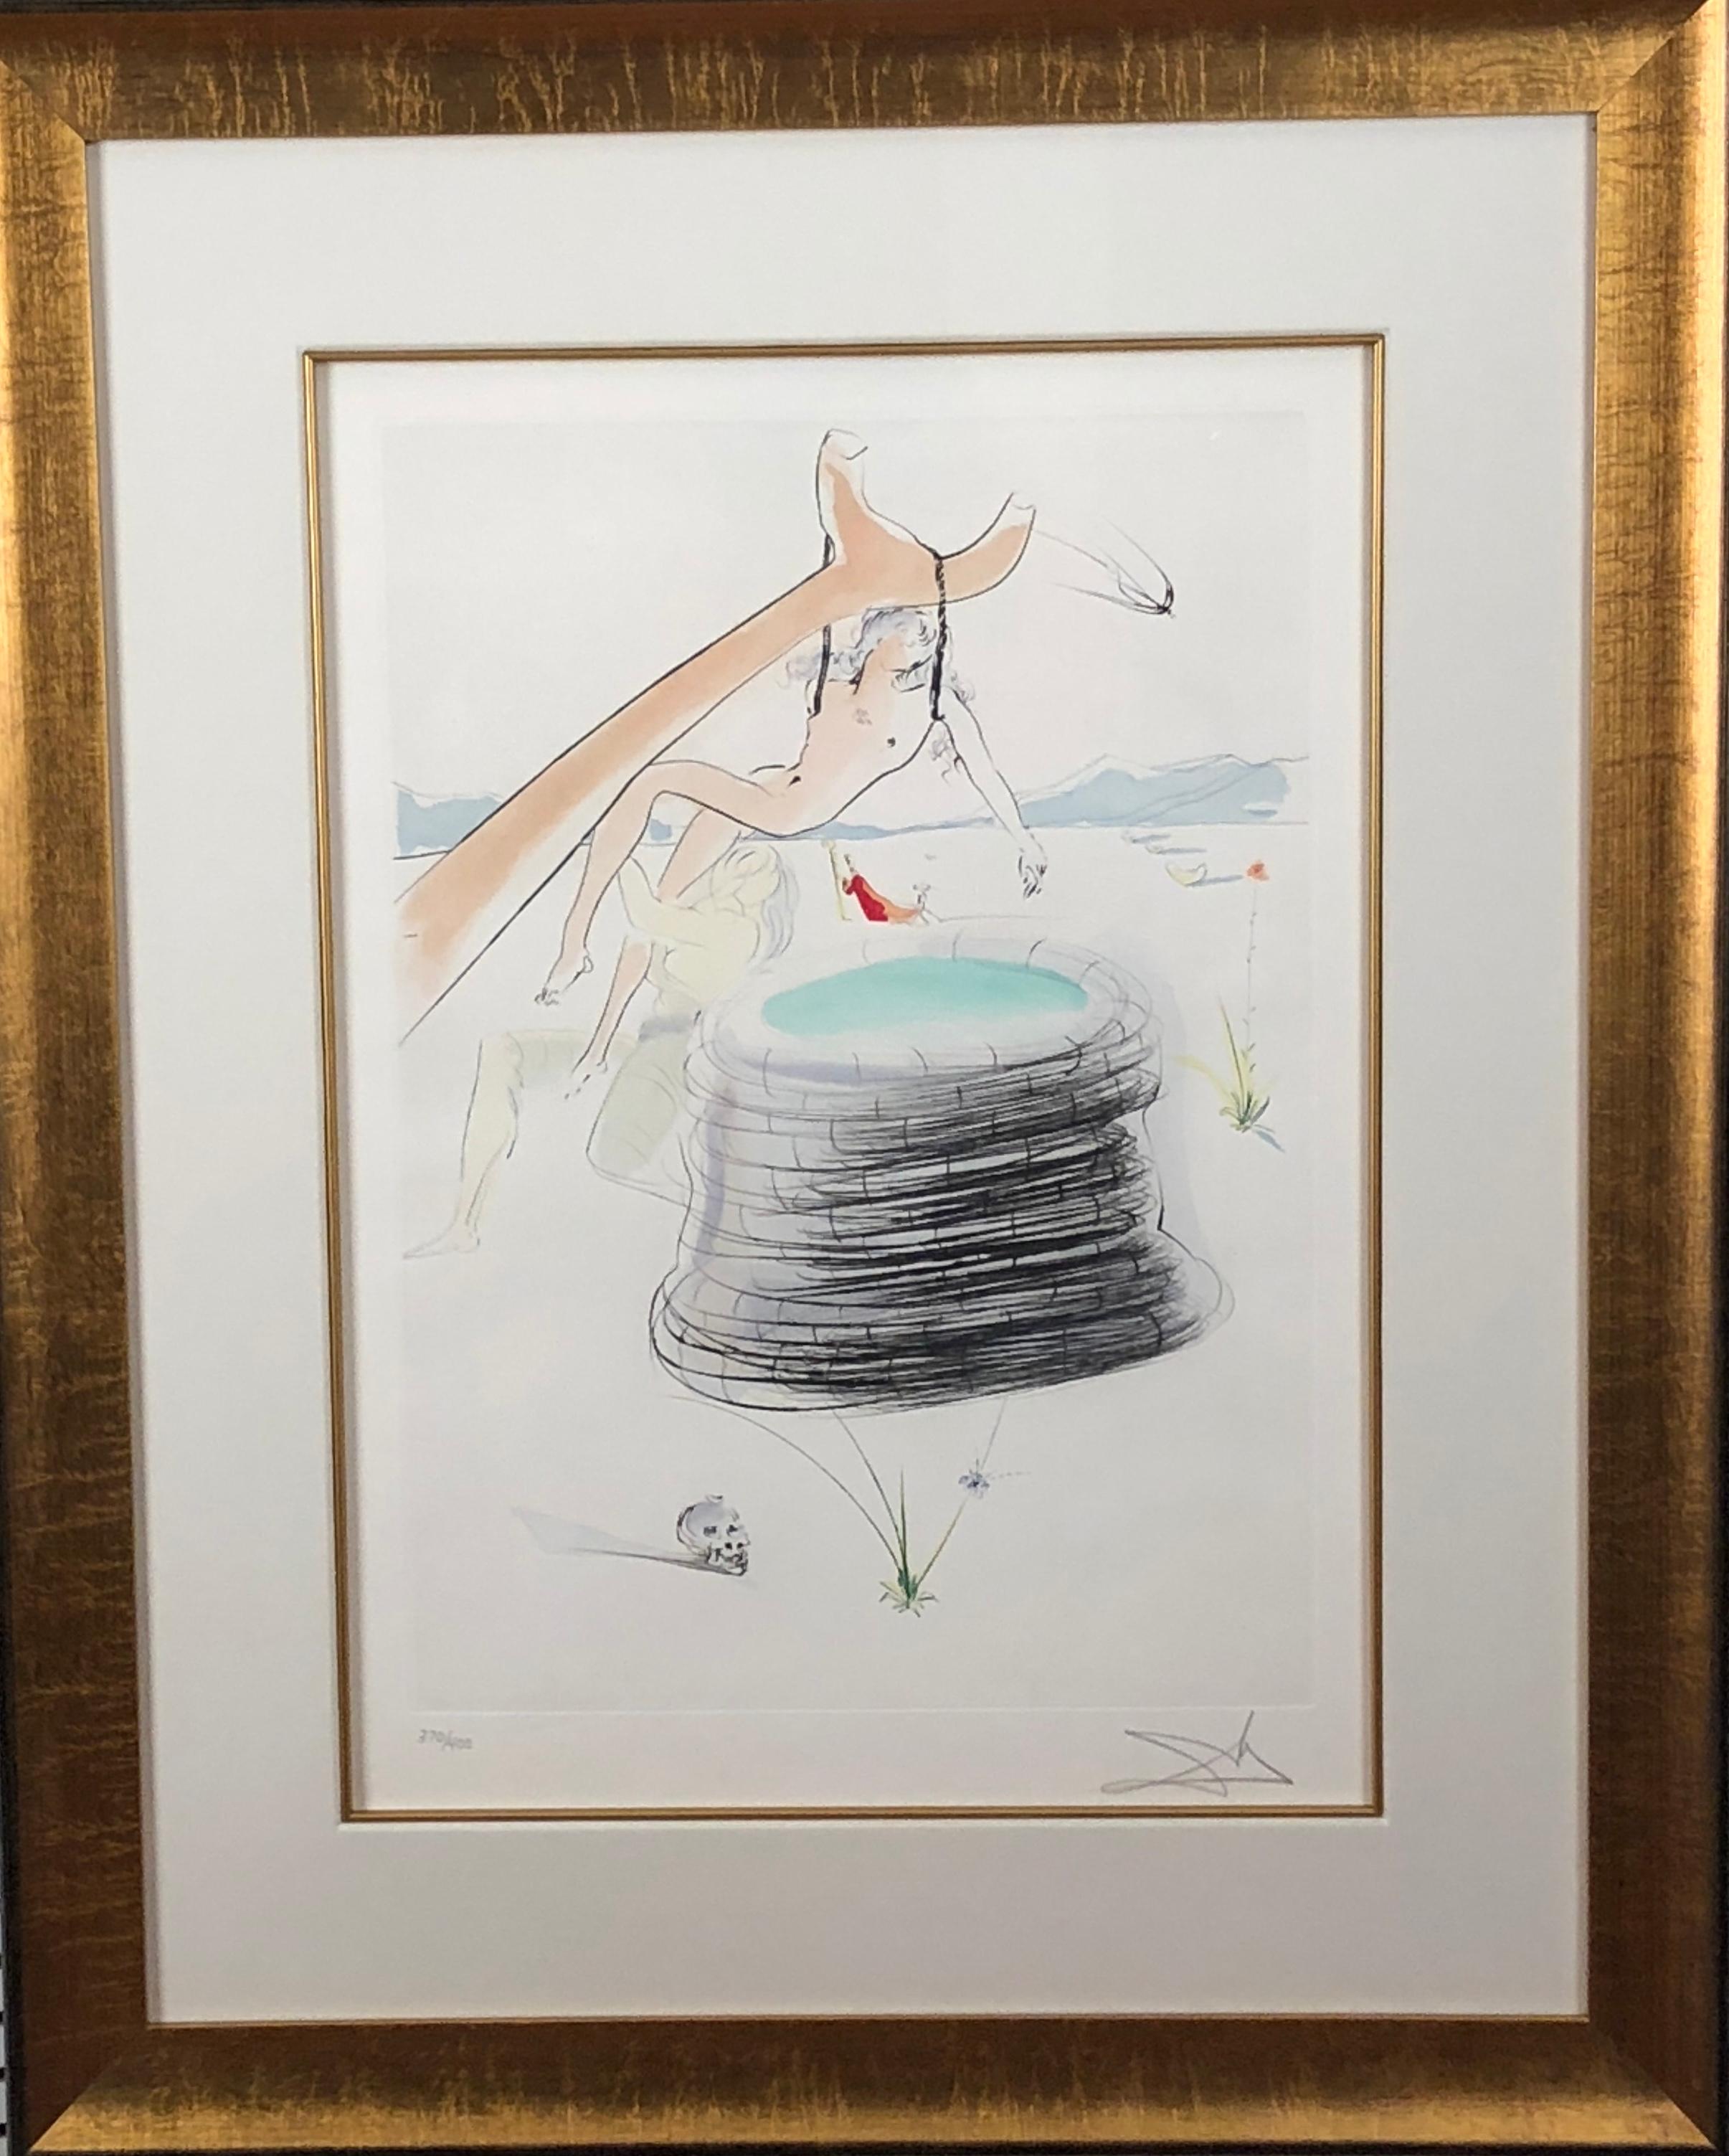 Joseph (Joseph hung by his brethren) from Our Historical Heritage - Print by Salvador Dalí